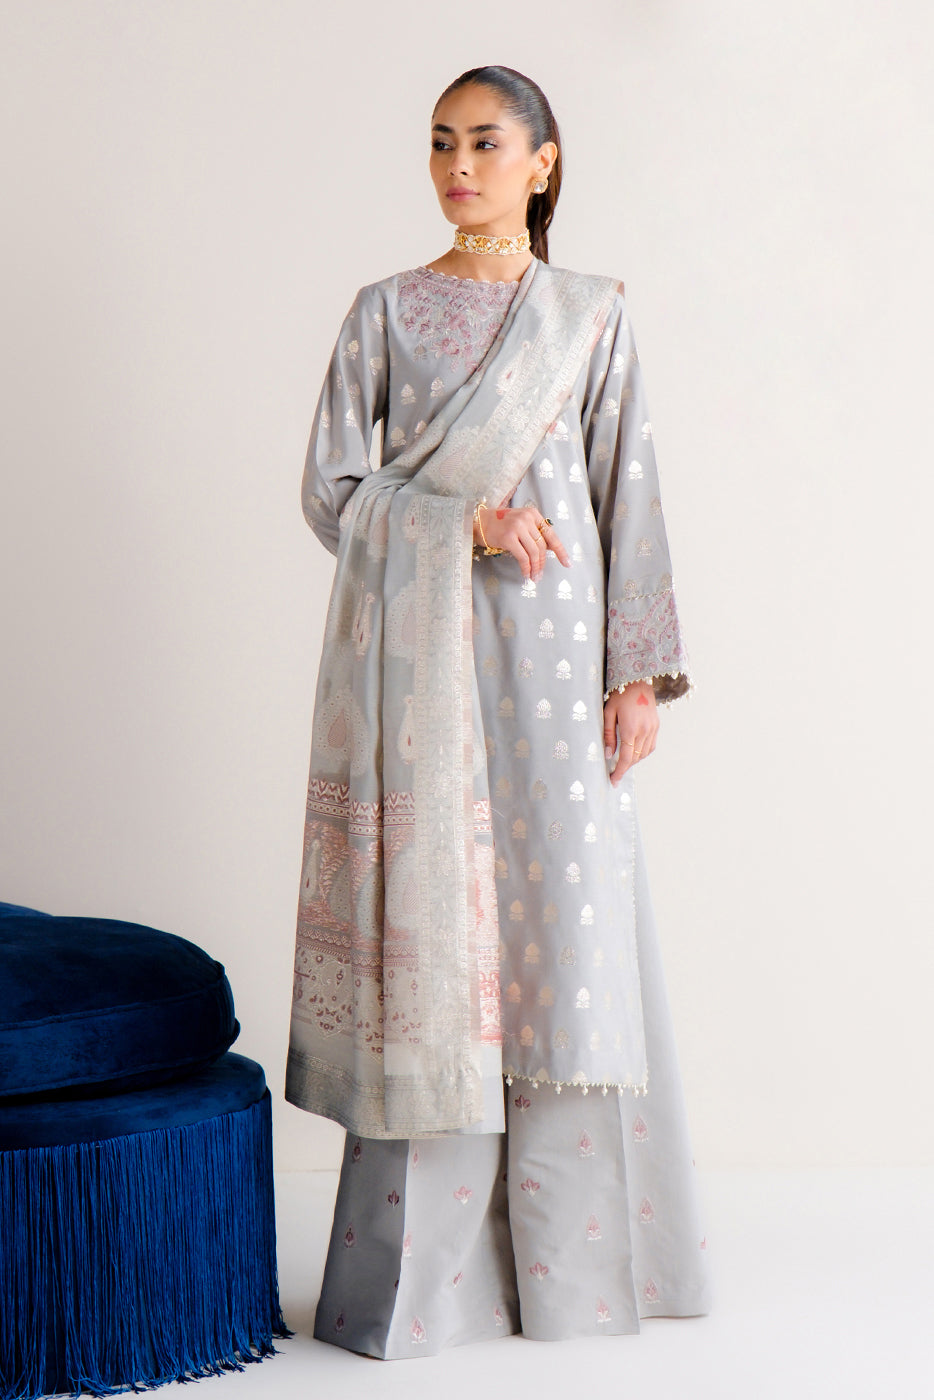 3 PIECE EMBROIDERED JACQUARD SUIT-MYSTIC MISTY (UNSTITCHED) - BEECHTREE